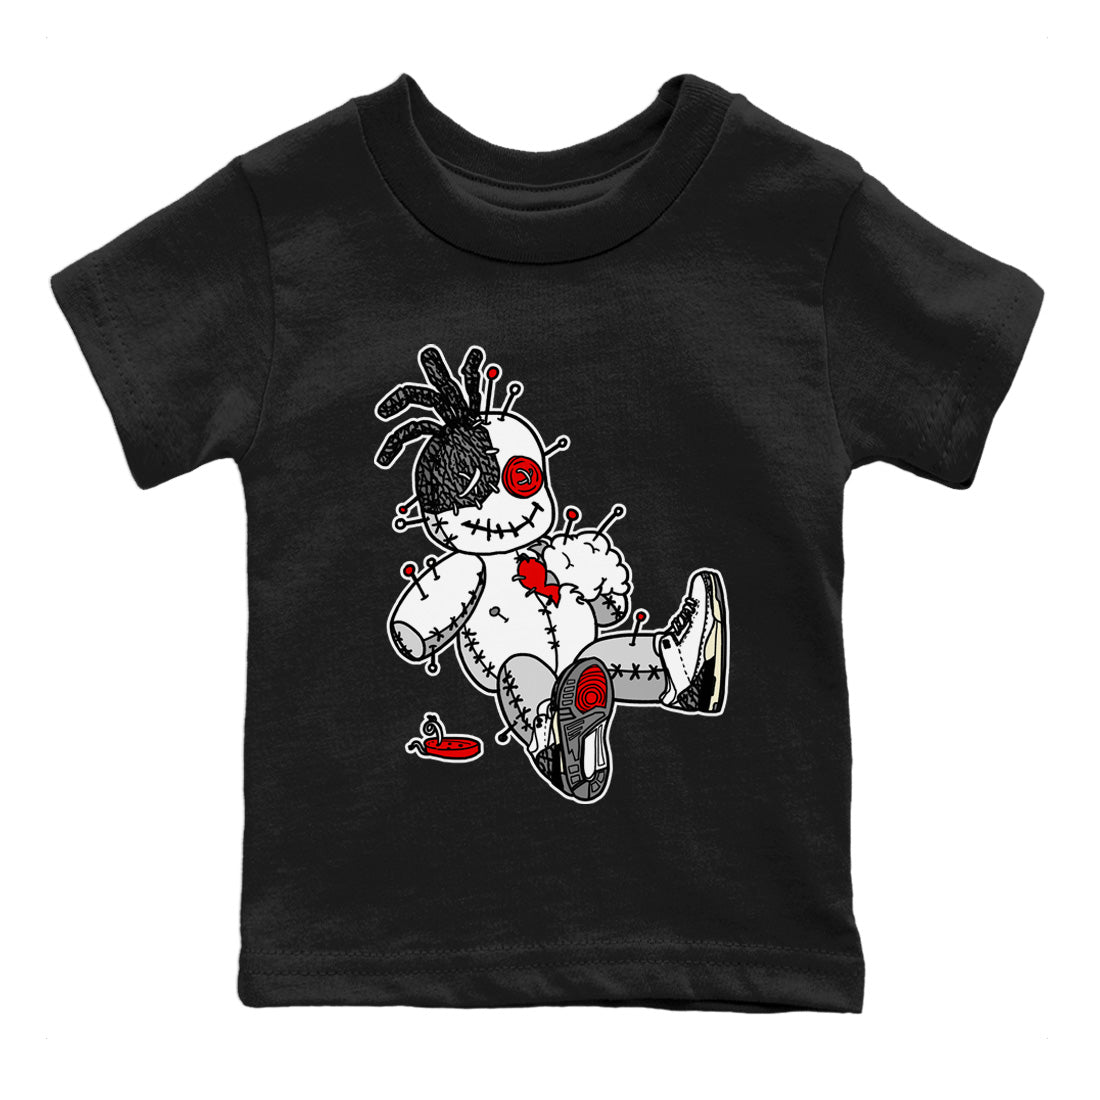 Air Jordan 3 White Cement Voodoo Doll Baby and Kids Sneaker Tees Air Jordan 3 Retro White Cement Kids Sneaker Tees Washing and Care Tip